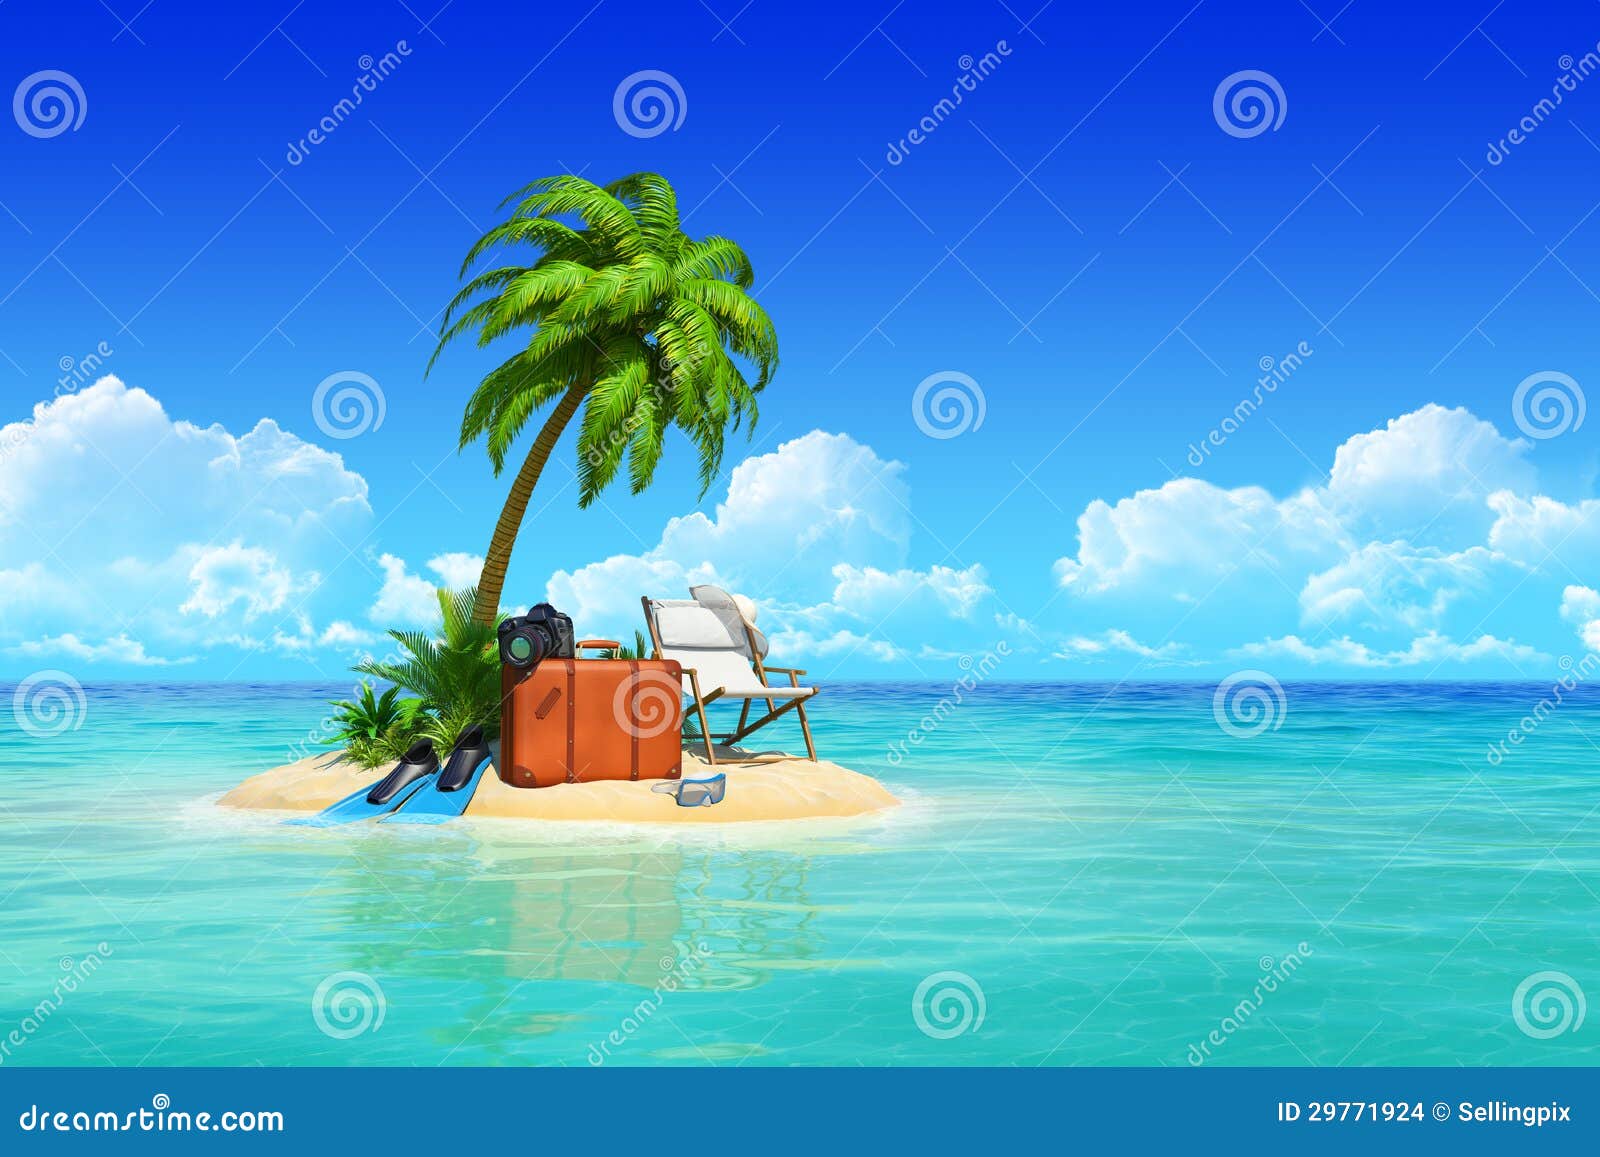 tropical island with palms, chaise lounge, suitcase.